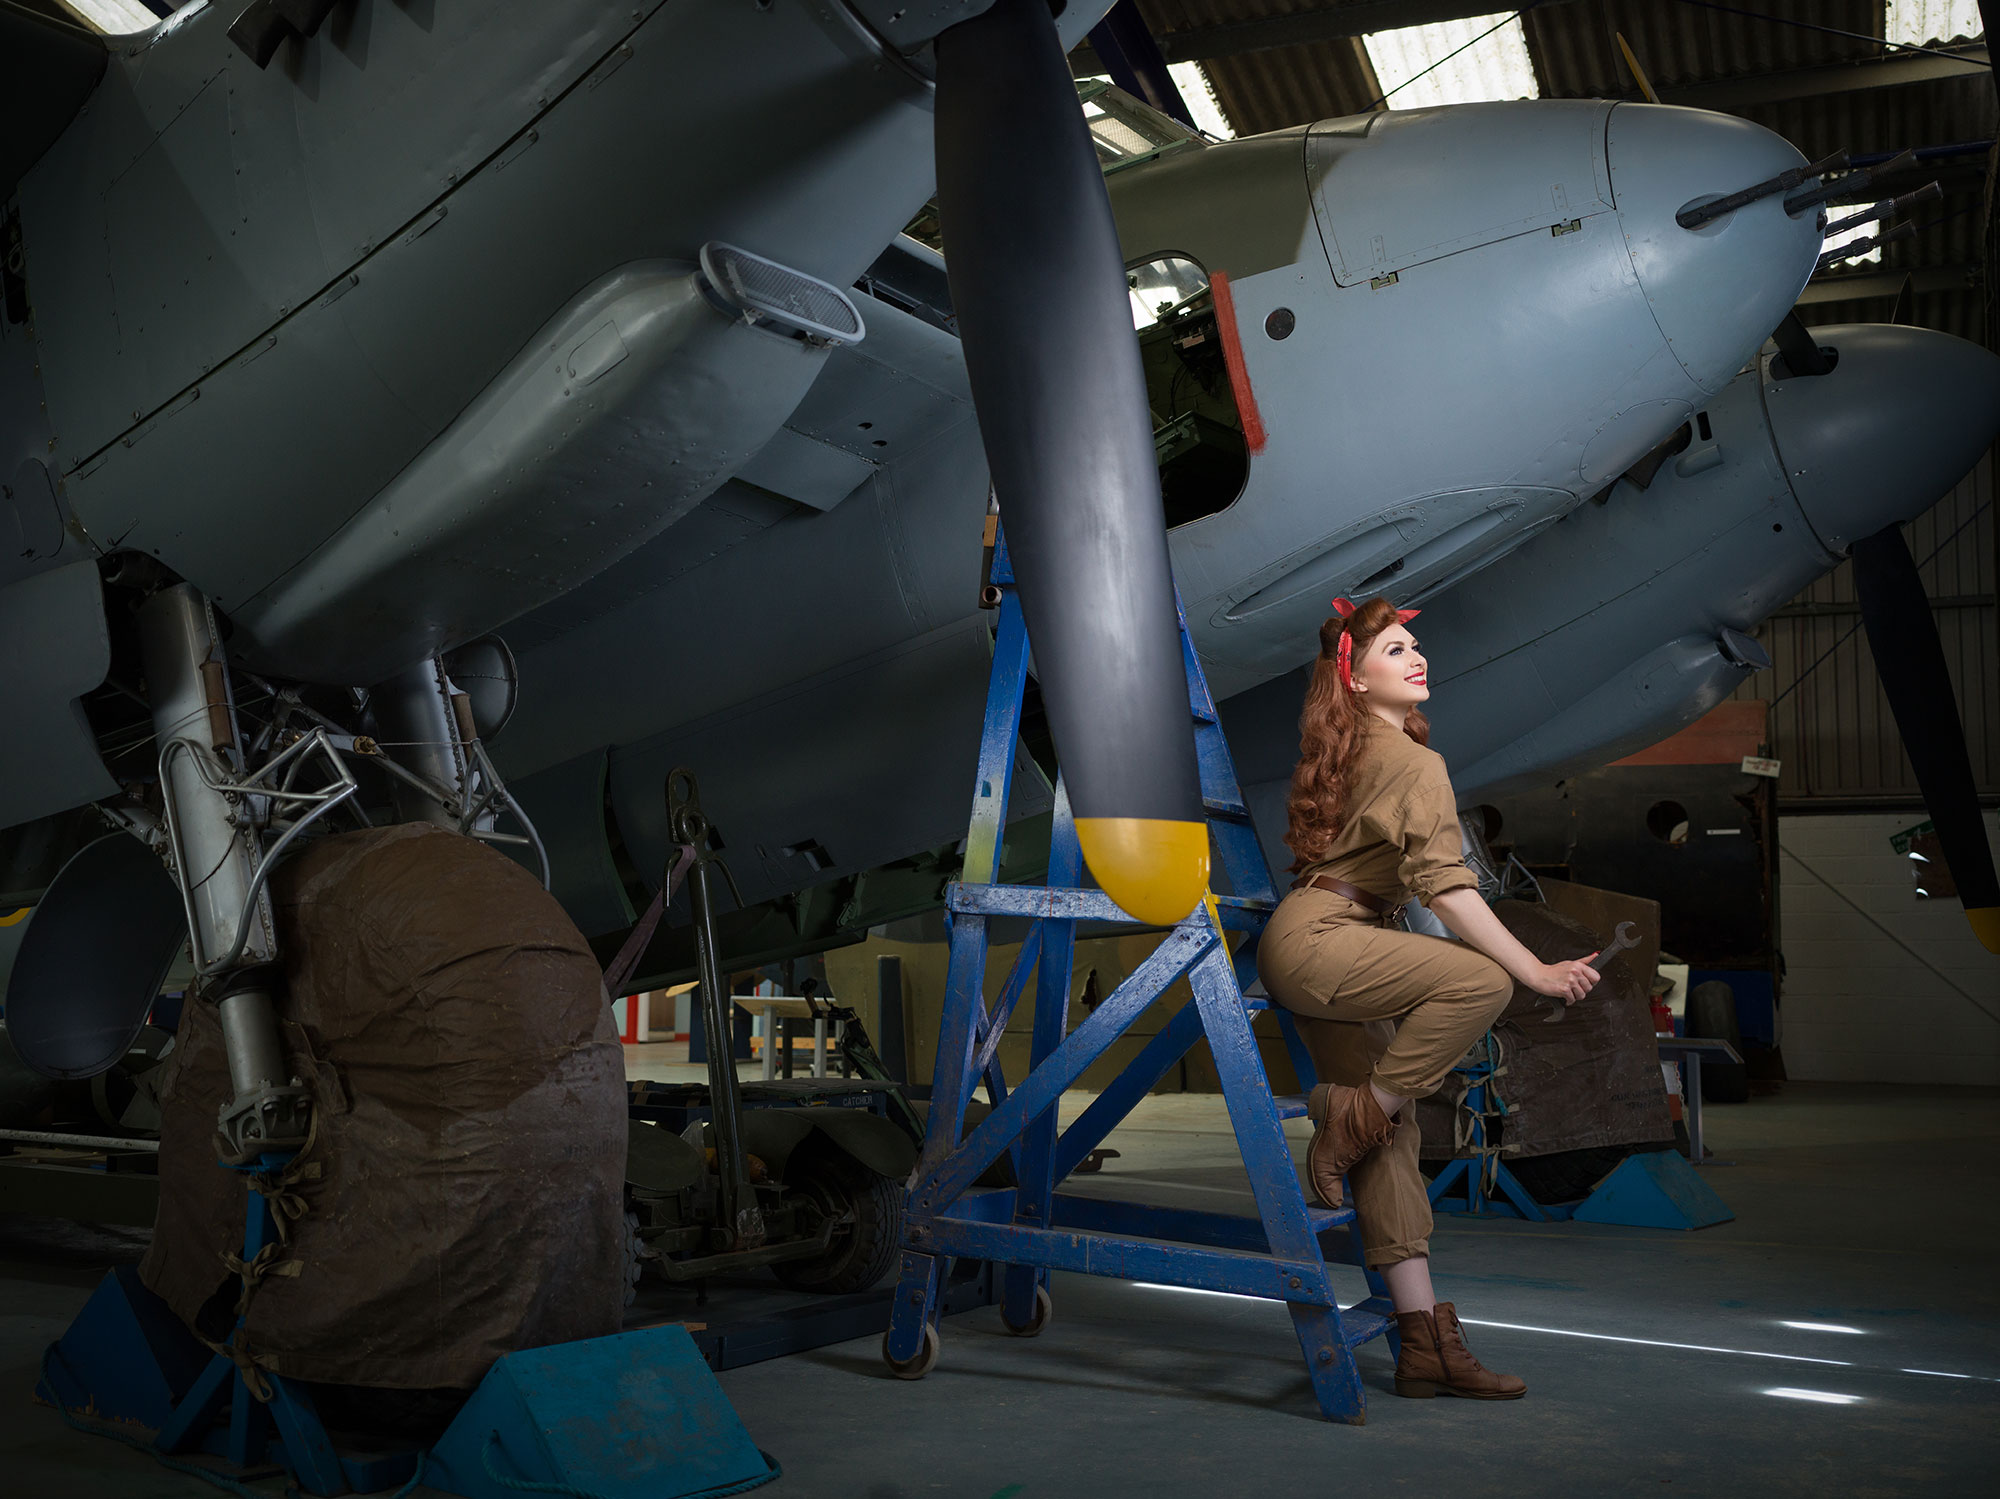 Vintage Pinup felicity Furore poses for Pinups & Planes: The Mosquito Photography Shoot Day with original de Havilland DH98 Mosquito prototype © Tigz Rice Ltd 2022. https://www.tigzrice.com